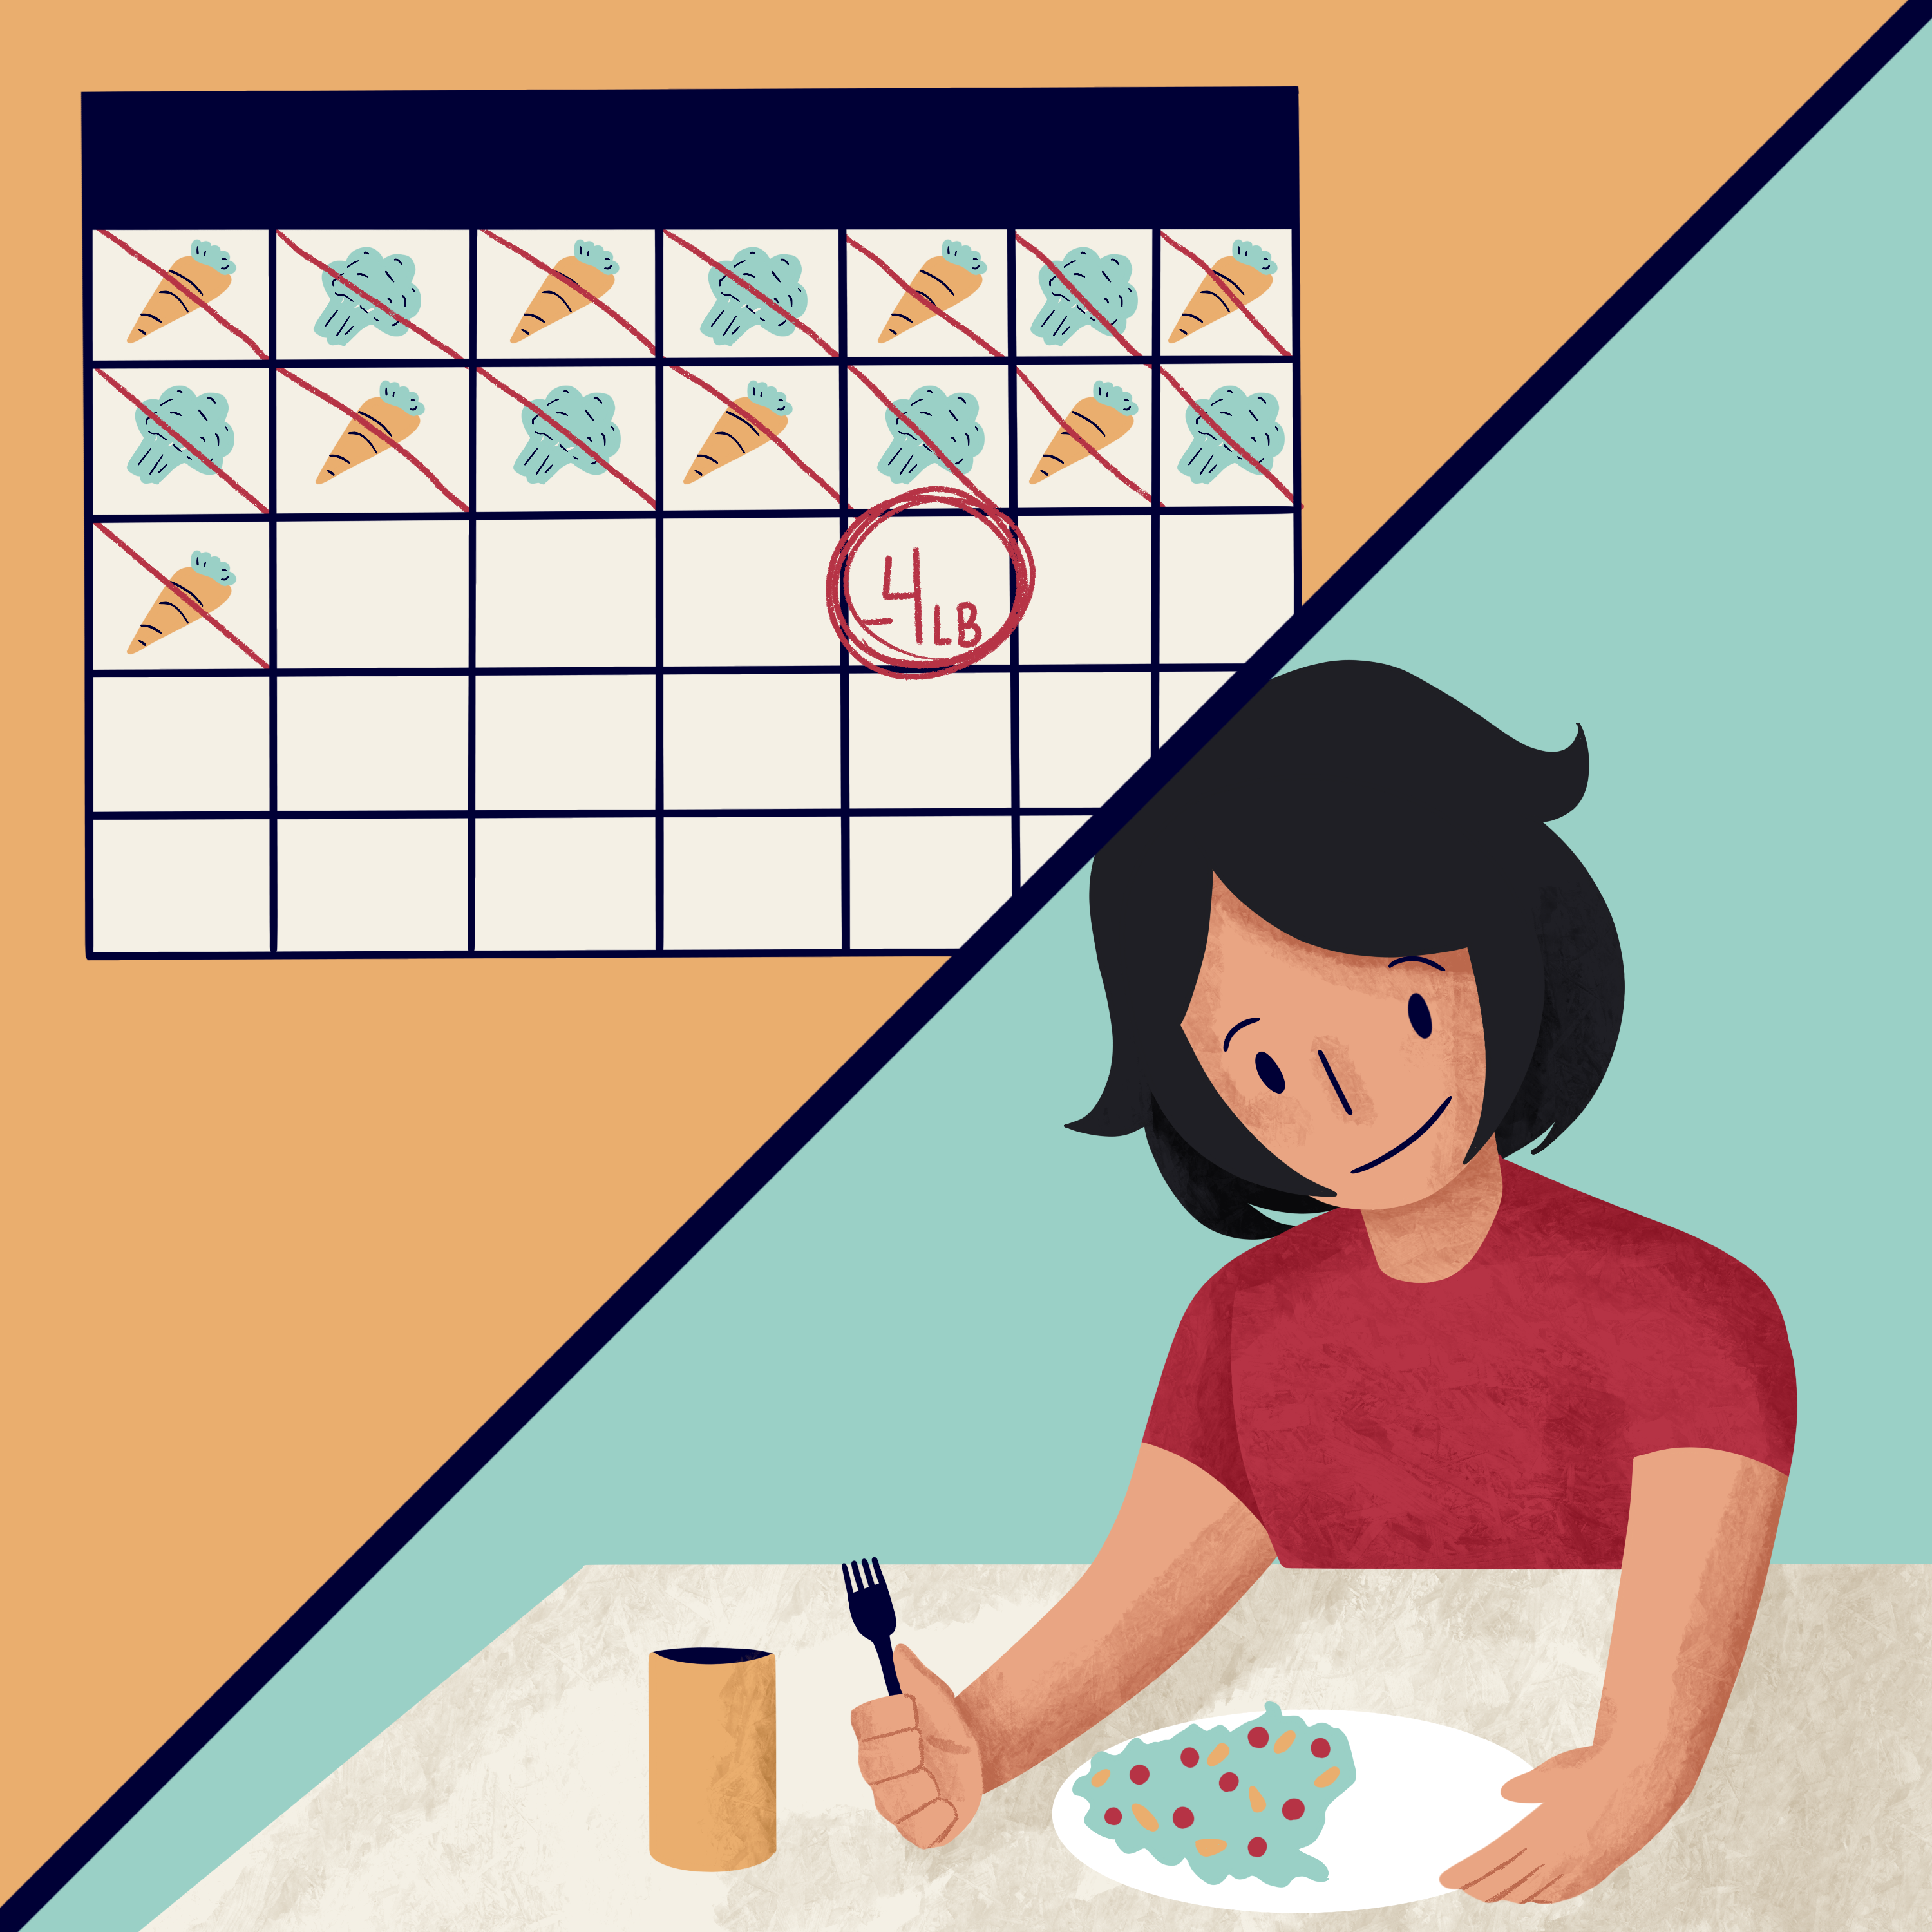 An illustration of a woman actively eating better with checkmarks on a calendar showing when she ate healthy meals.